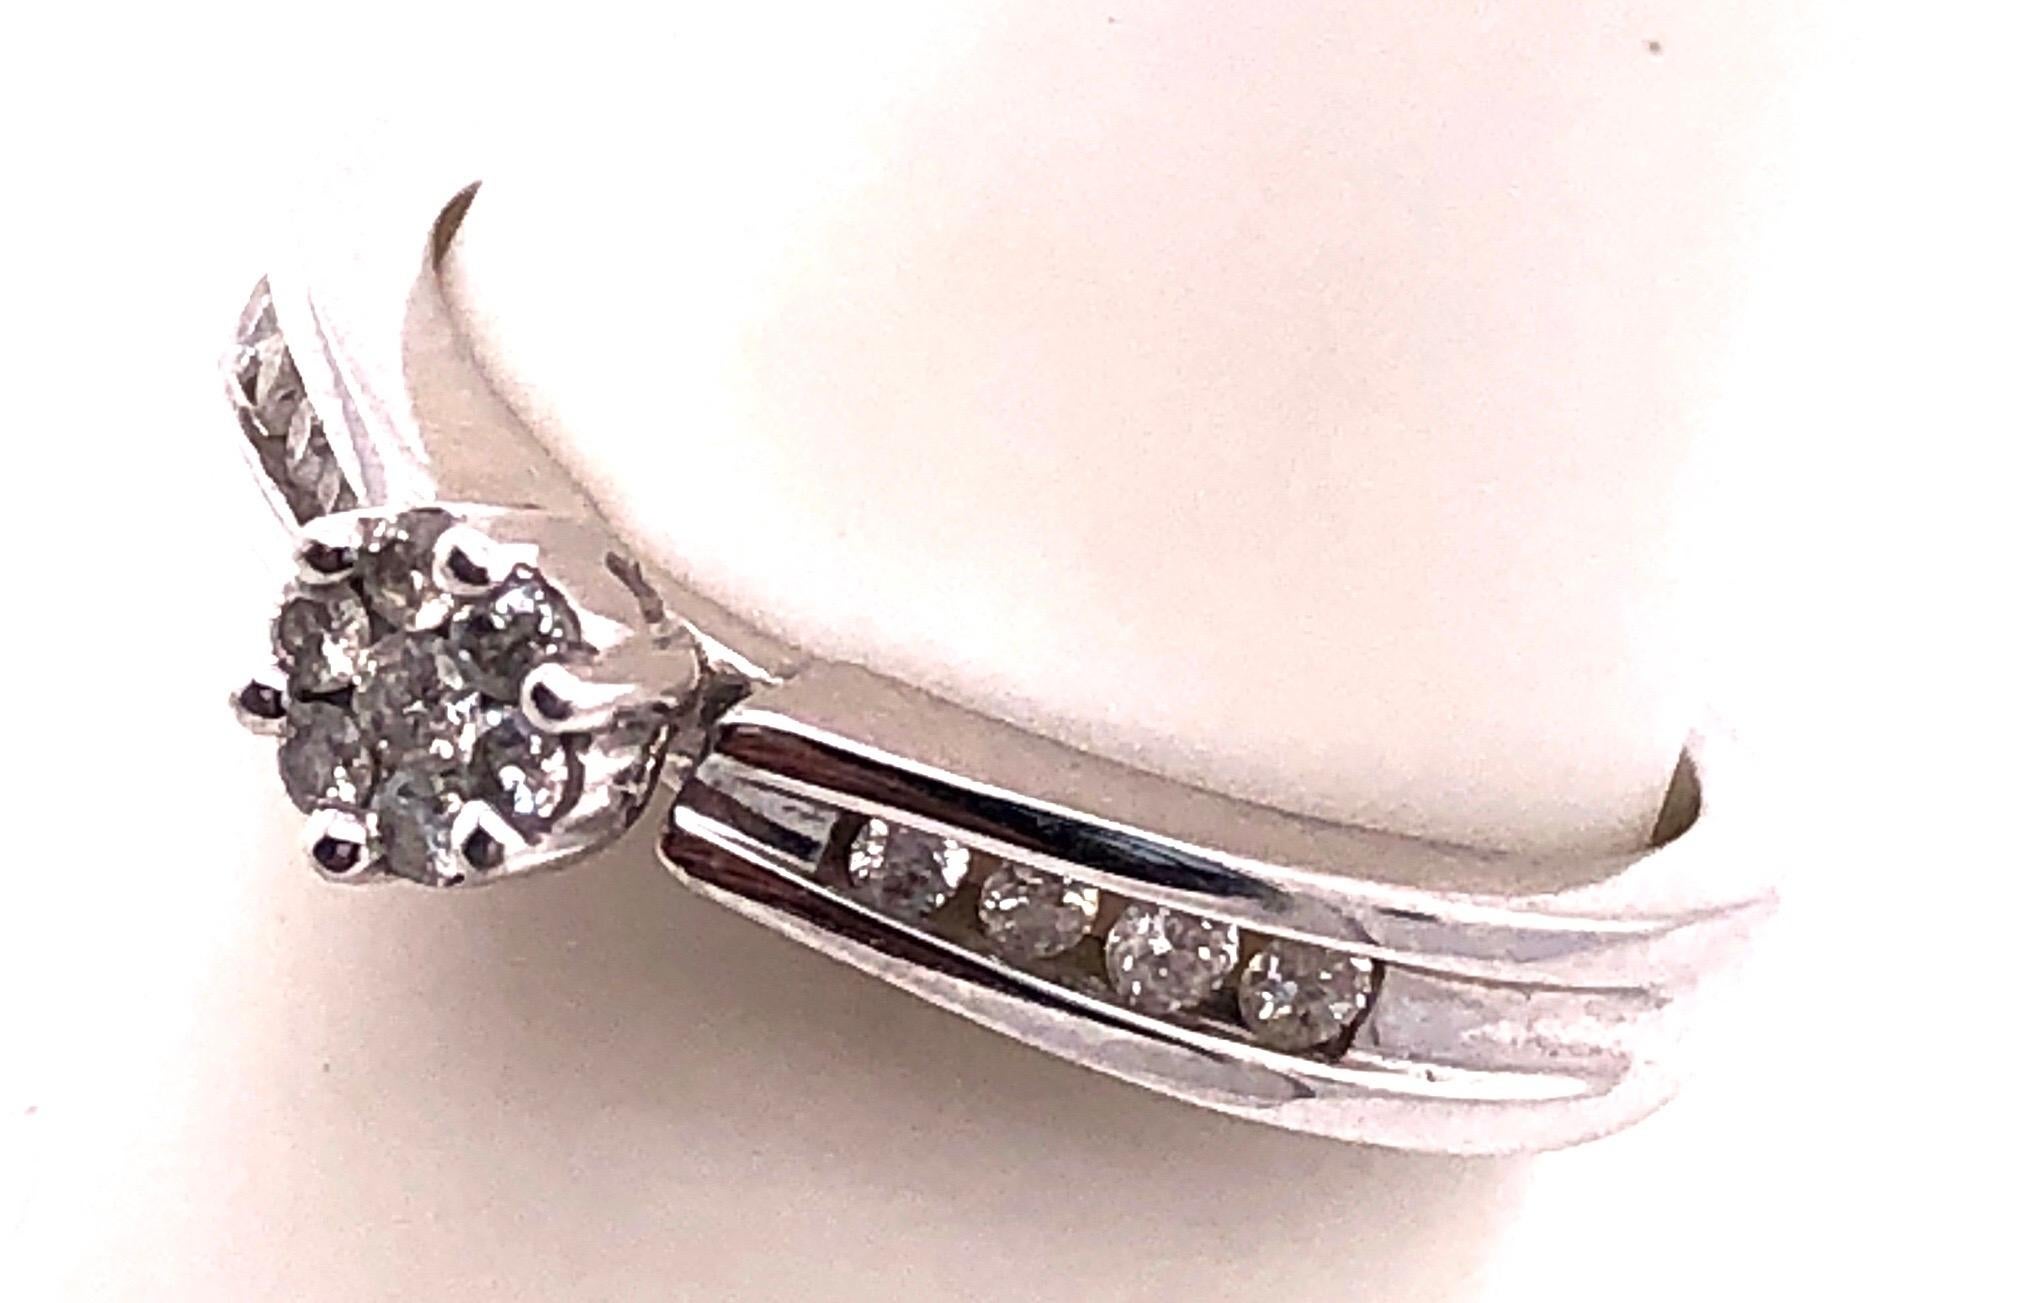 14 Karat White Gold Semi Mount Diamond Engagement Fashion Ring 0.53 TDW In Good Condition For Sale In Stamford, CT